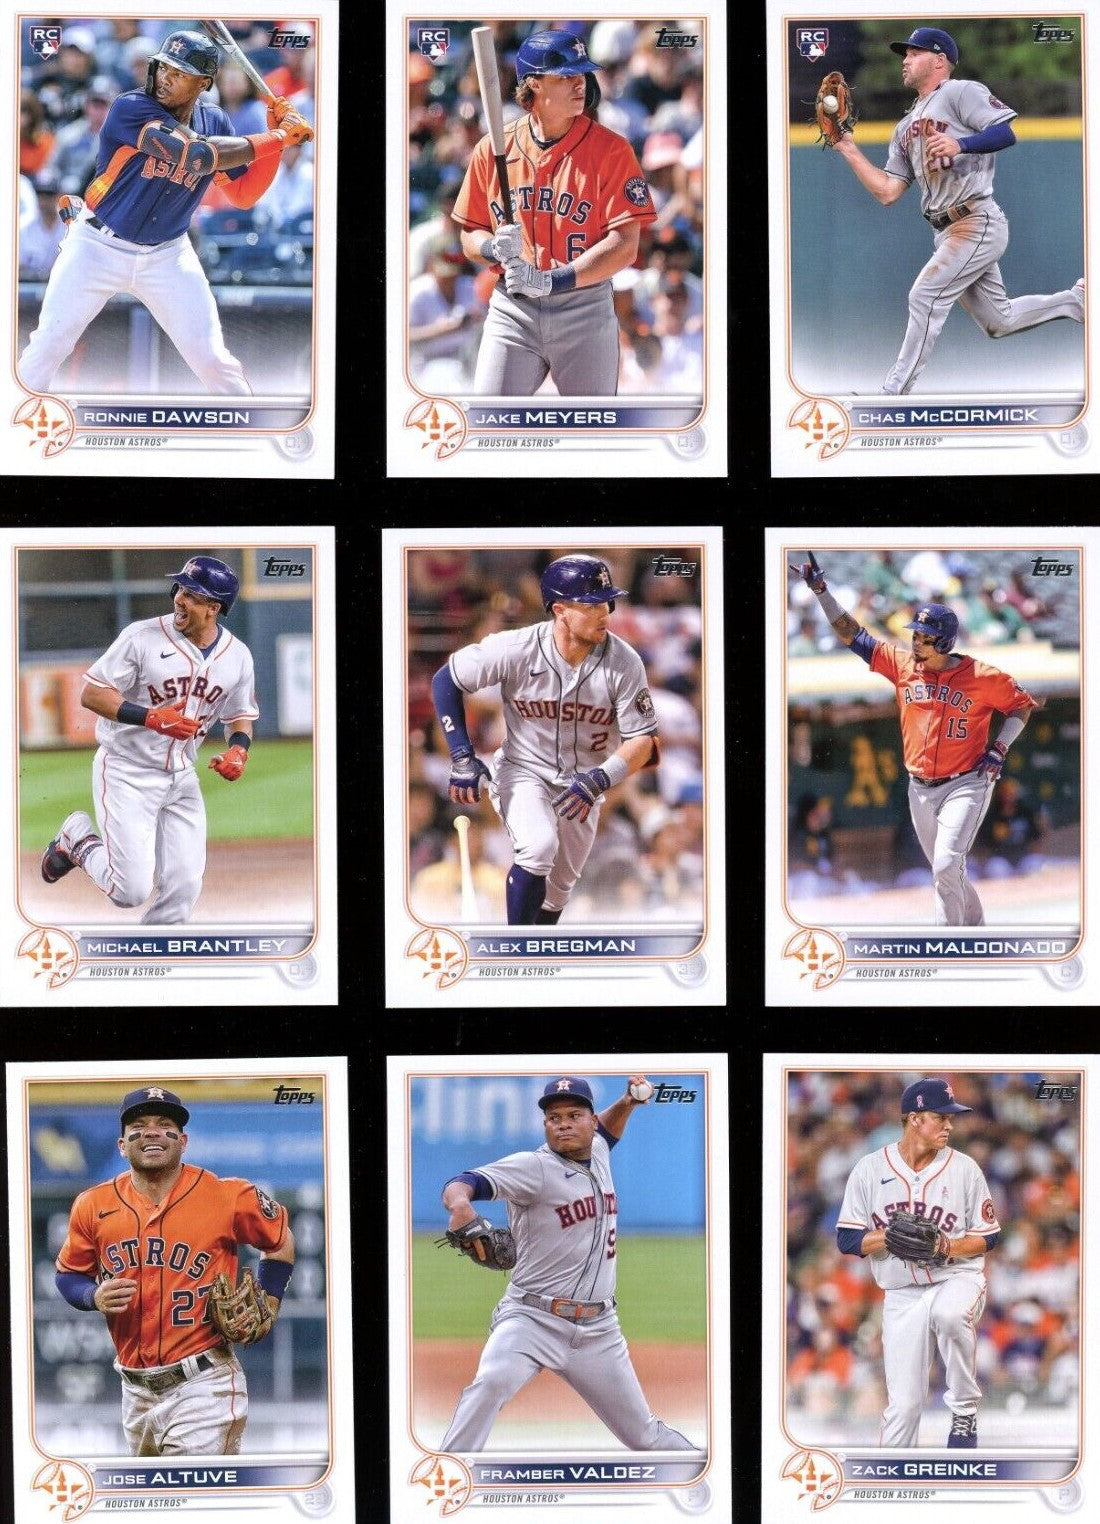  2003 Topps Traded Houston Astros Almost Complete Team Set Houston  Astros (Set) NM/MT Astros : Collectibles & Fine Art